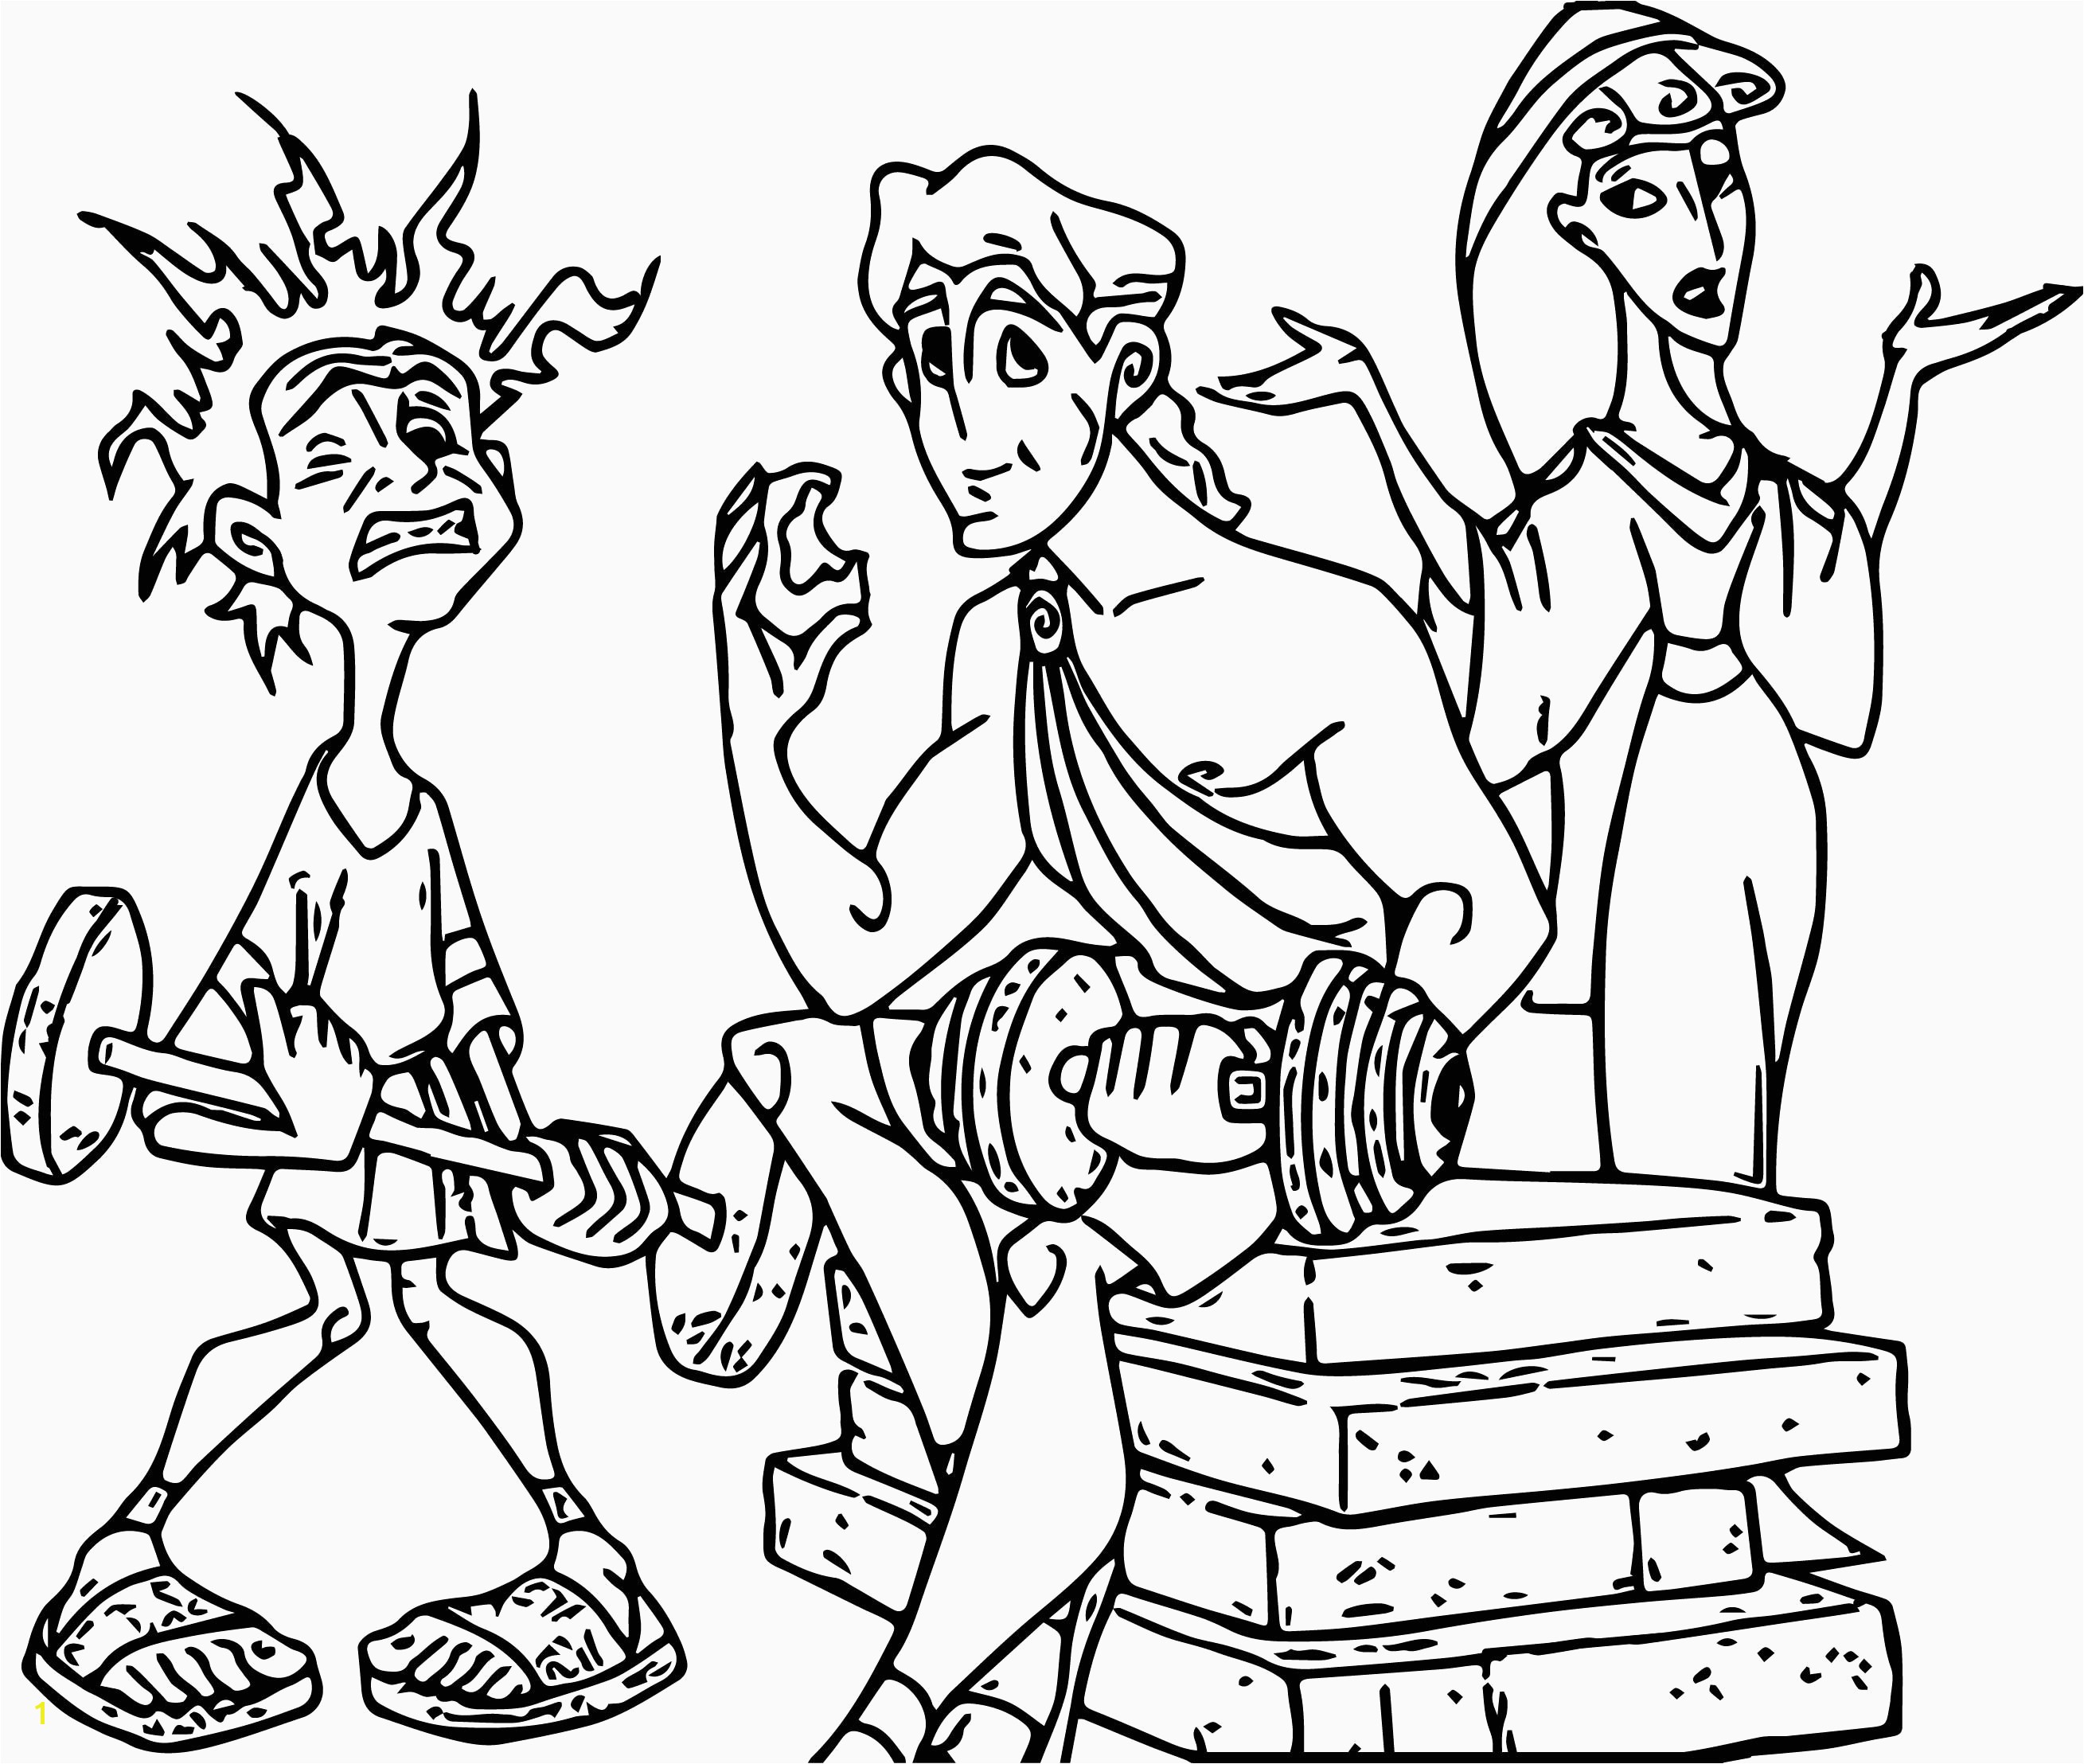 Adult Male Coloring Pages Adult Coloring Pages Disney Best Disney Maleficent Coloring Pages